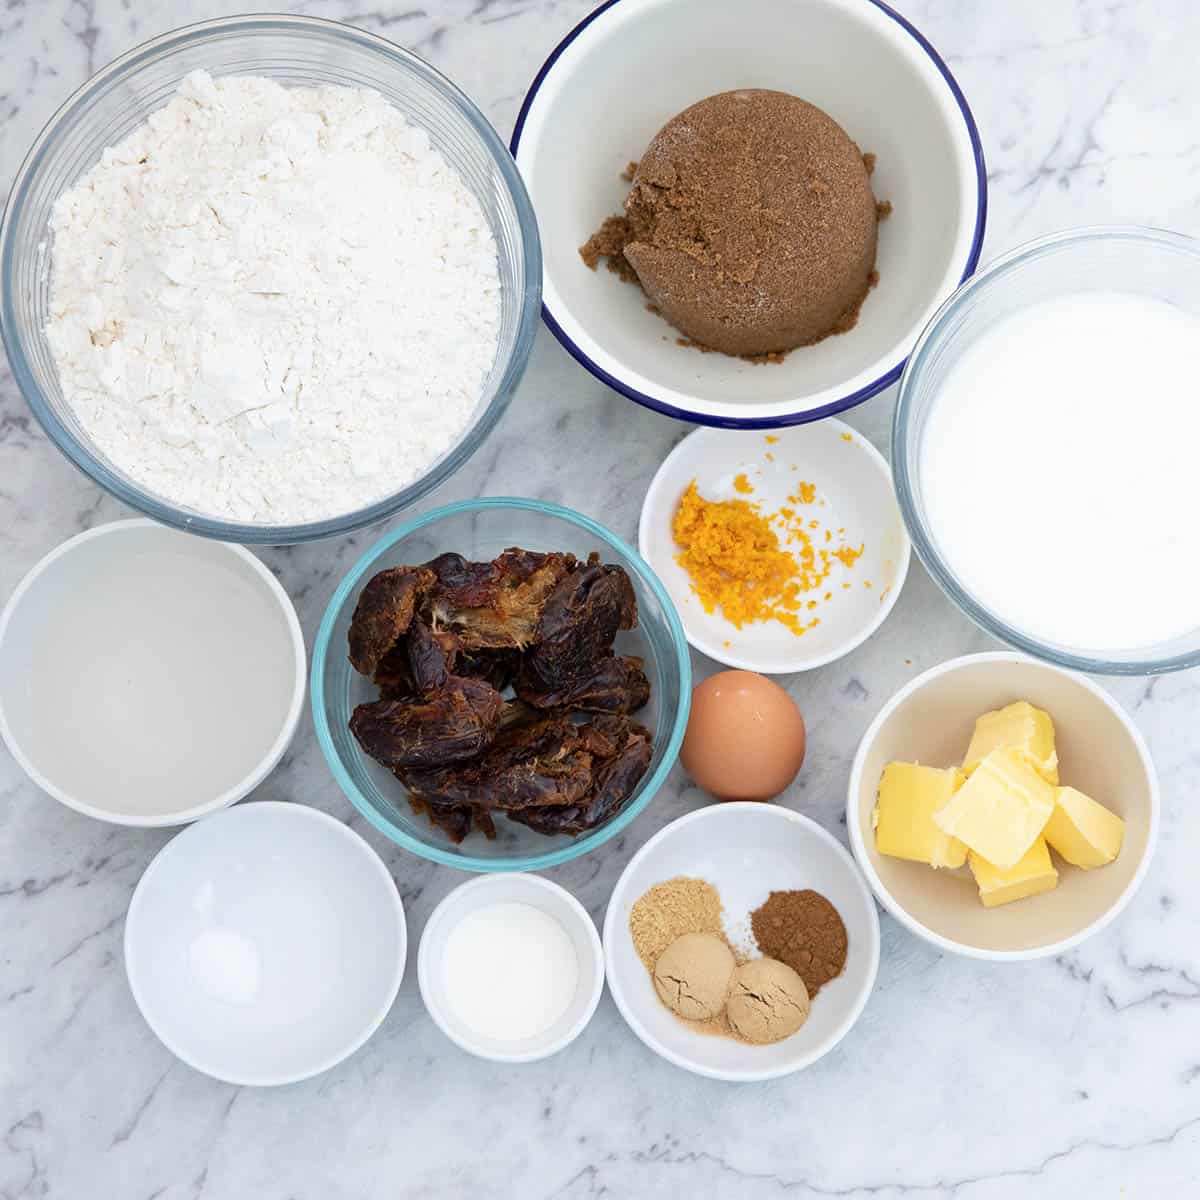 All the ingredients for Sticky Date Pudding measured out Mise en Plus